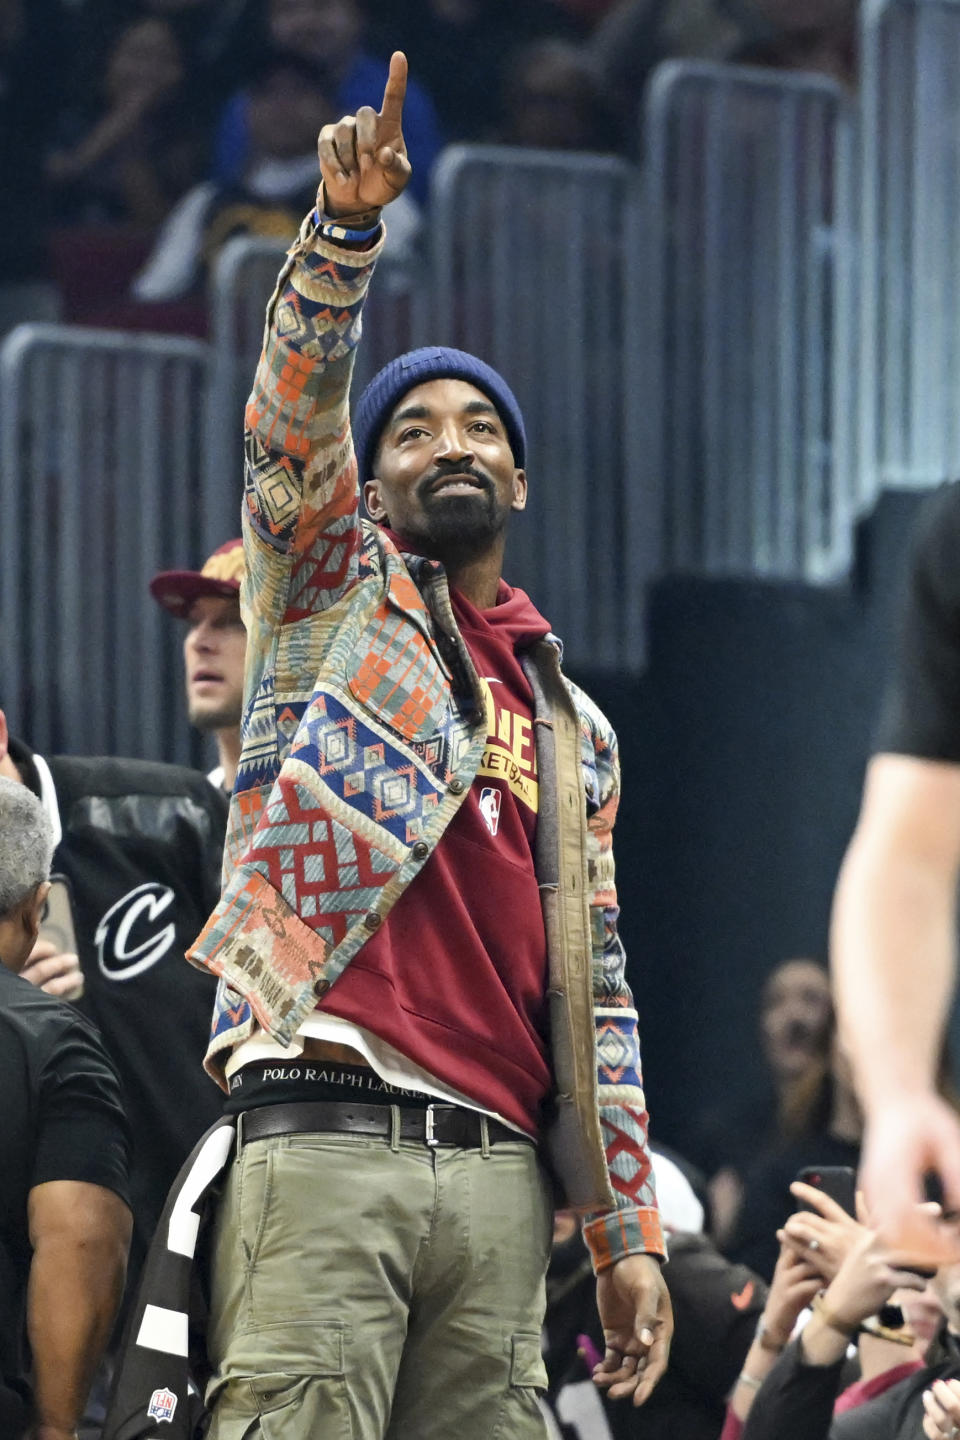 Former NBA player J.R. Smith waves to the crowd during the first half of an NBA basketball game between the Dallas Mavericks and the Cleveland Cavaliers, Saturday, Dec. 17, 2022, in Cleveland. (AP Photo/Nick Cammett)